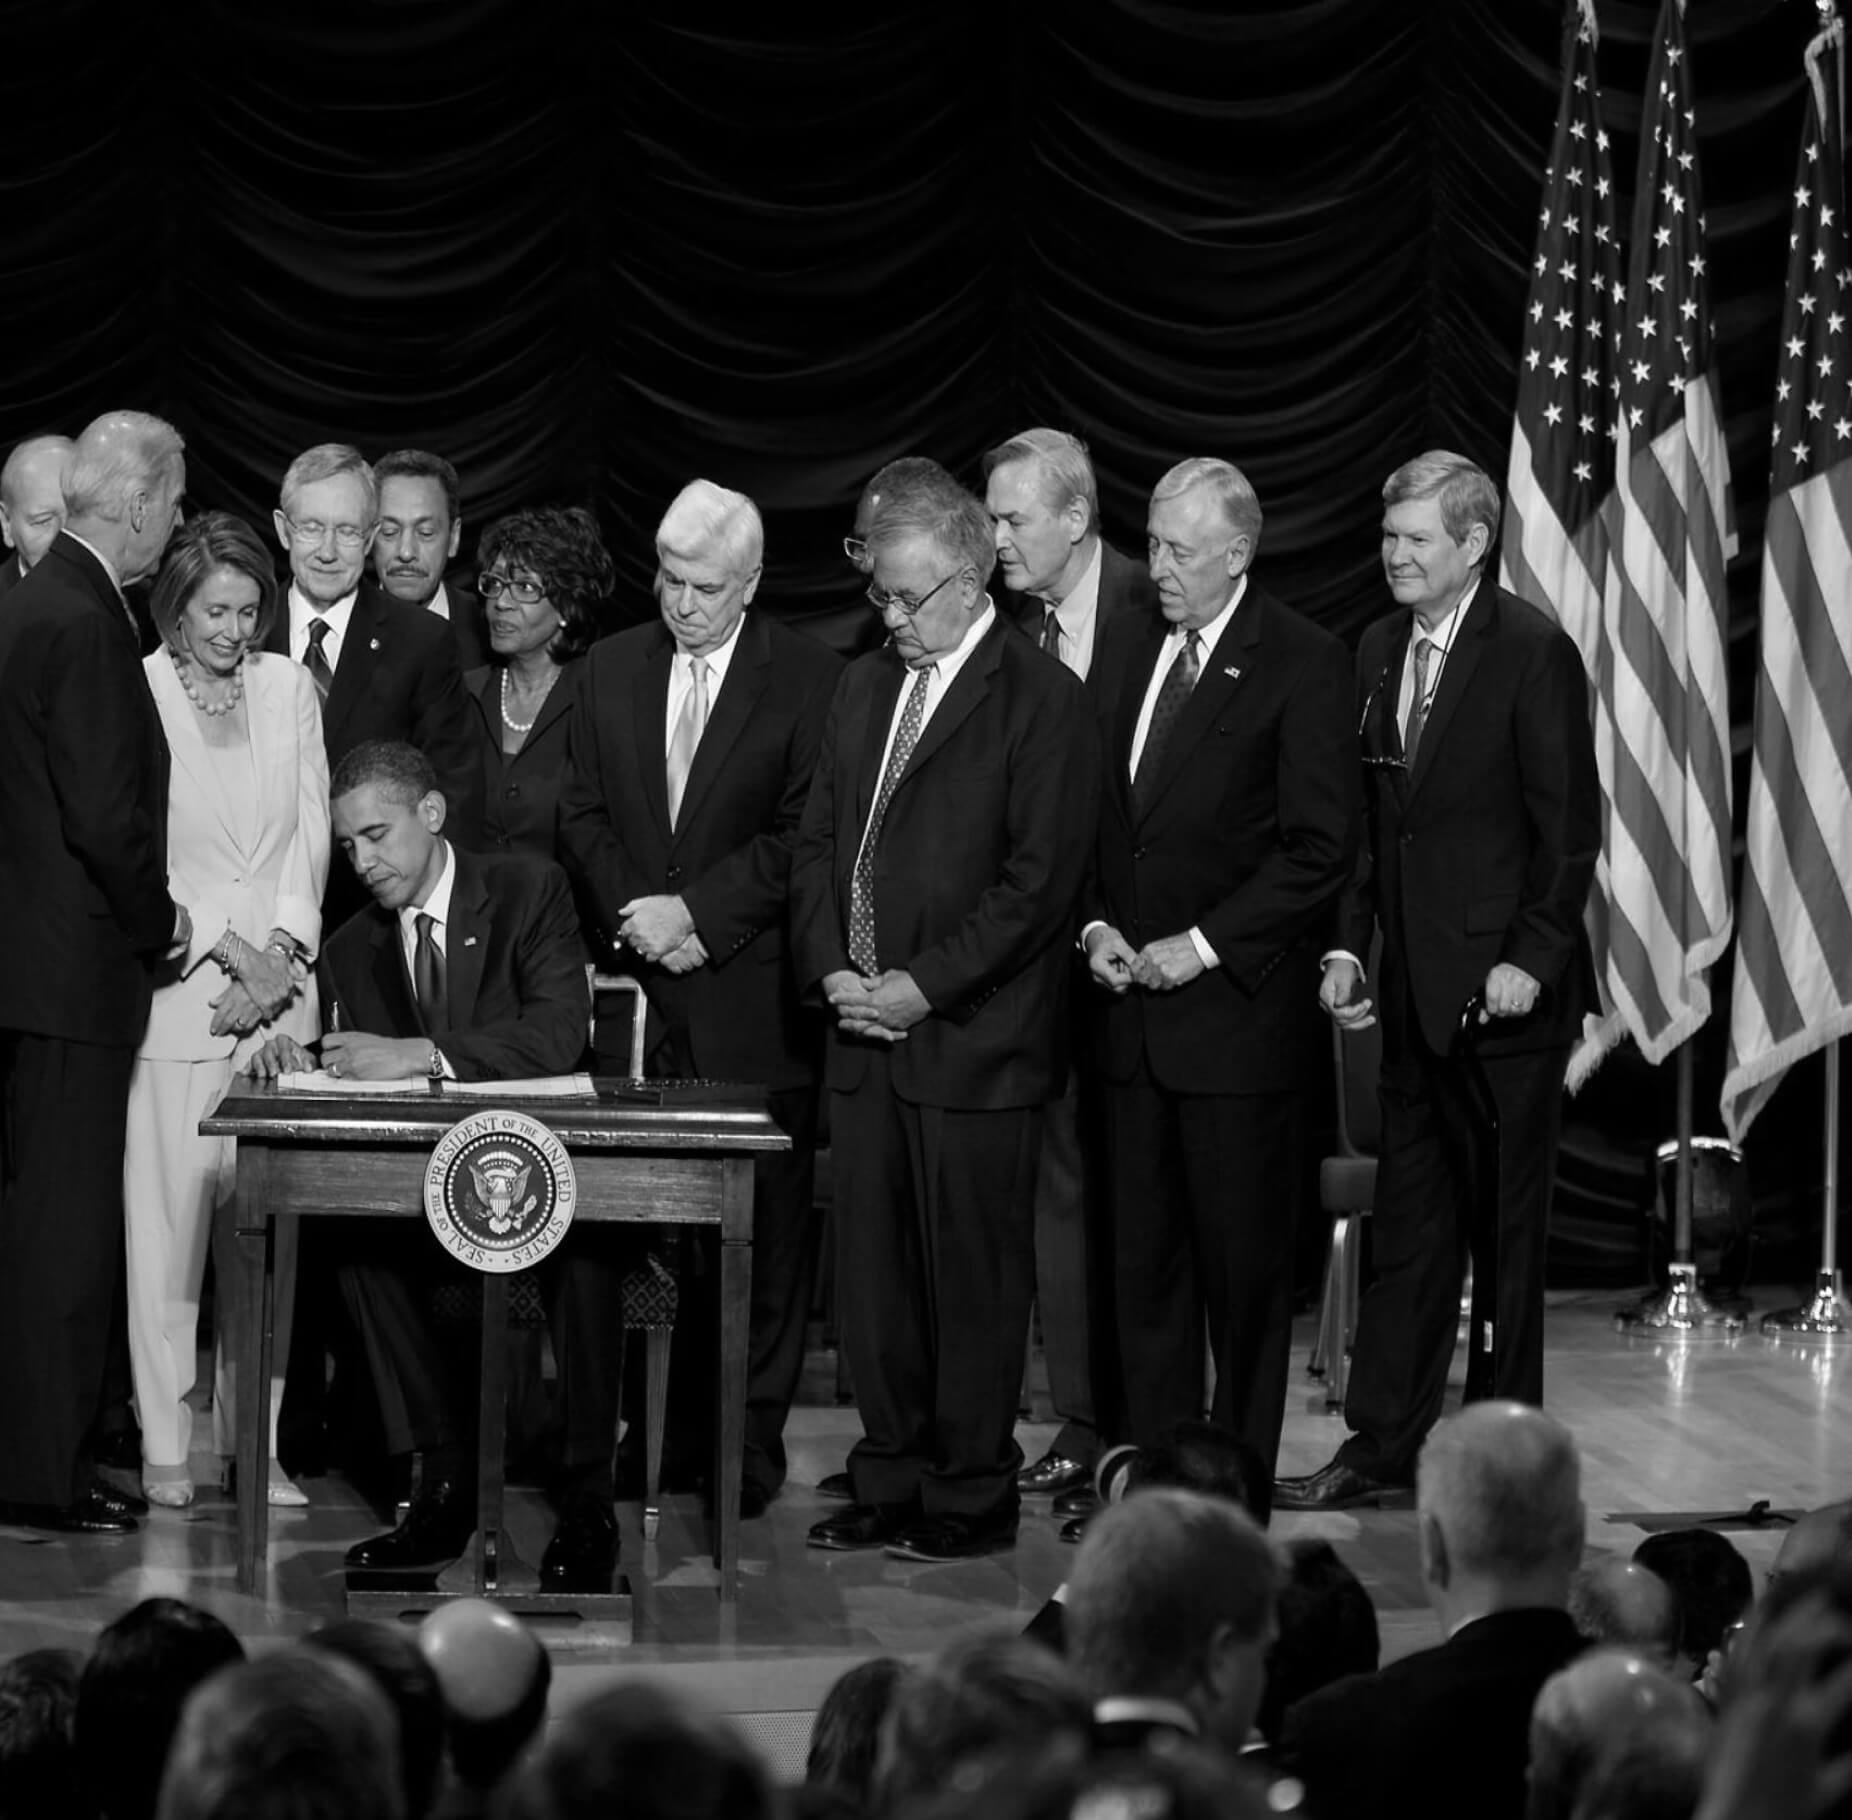 Barack Obama signing a bill with congress behind him.